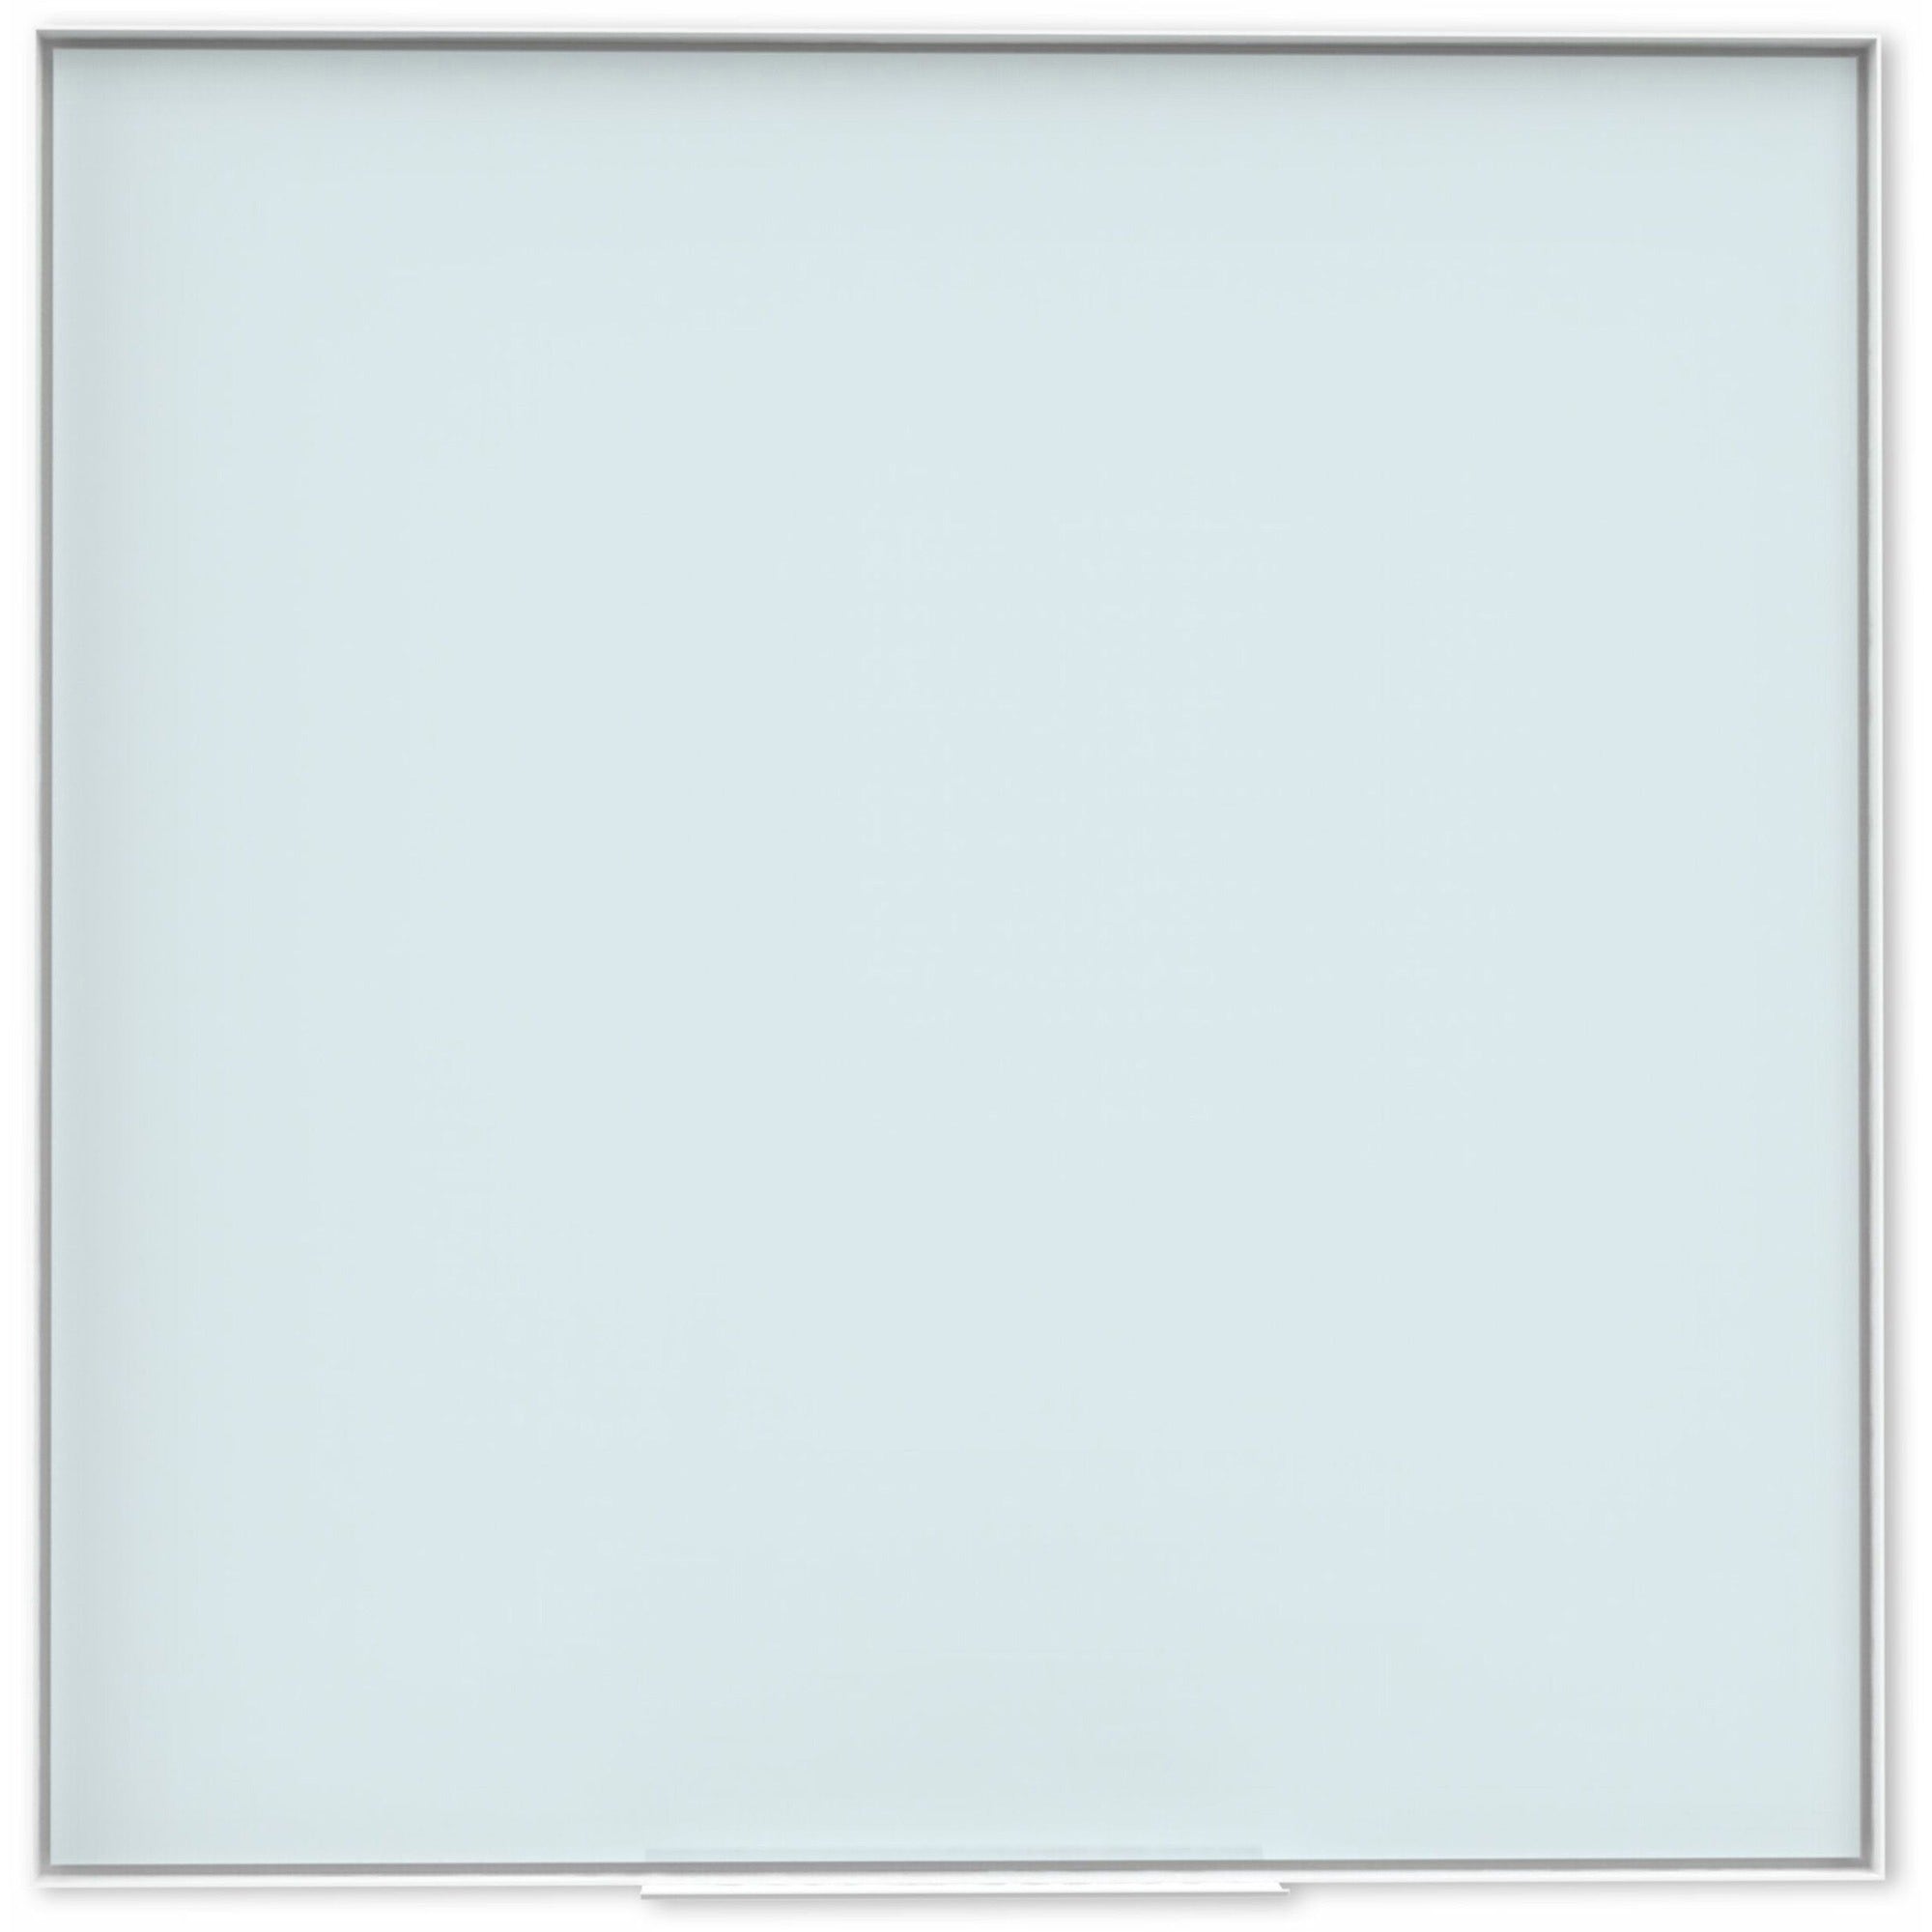 u-brands-frosted-glass-dry-erase-board-35-29-ft-width-x-35-29-ft-height-frosted-white-tempered-glass-surface-white-aluminum-frame-square-horizontal-vertical-1-each_ubr2825u0001 - 1